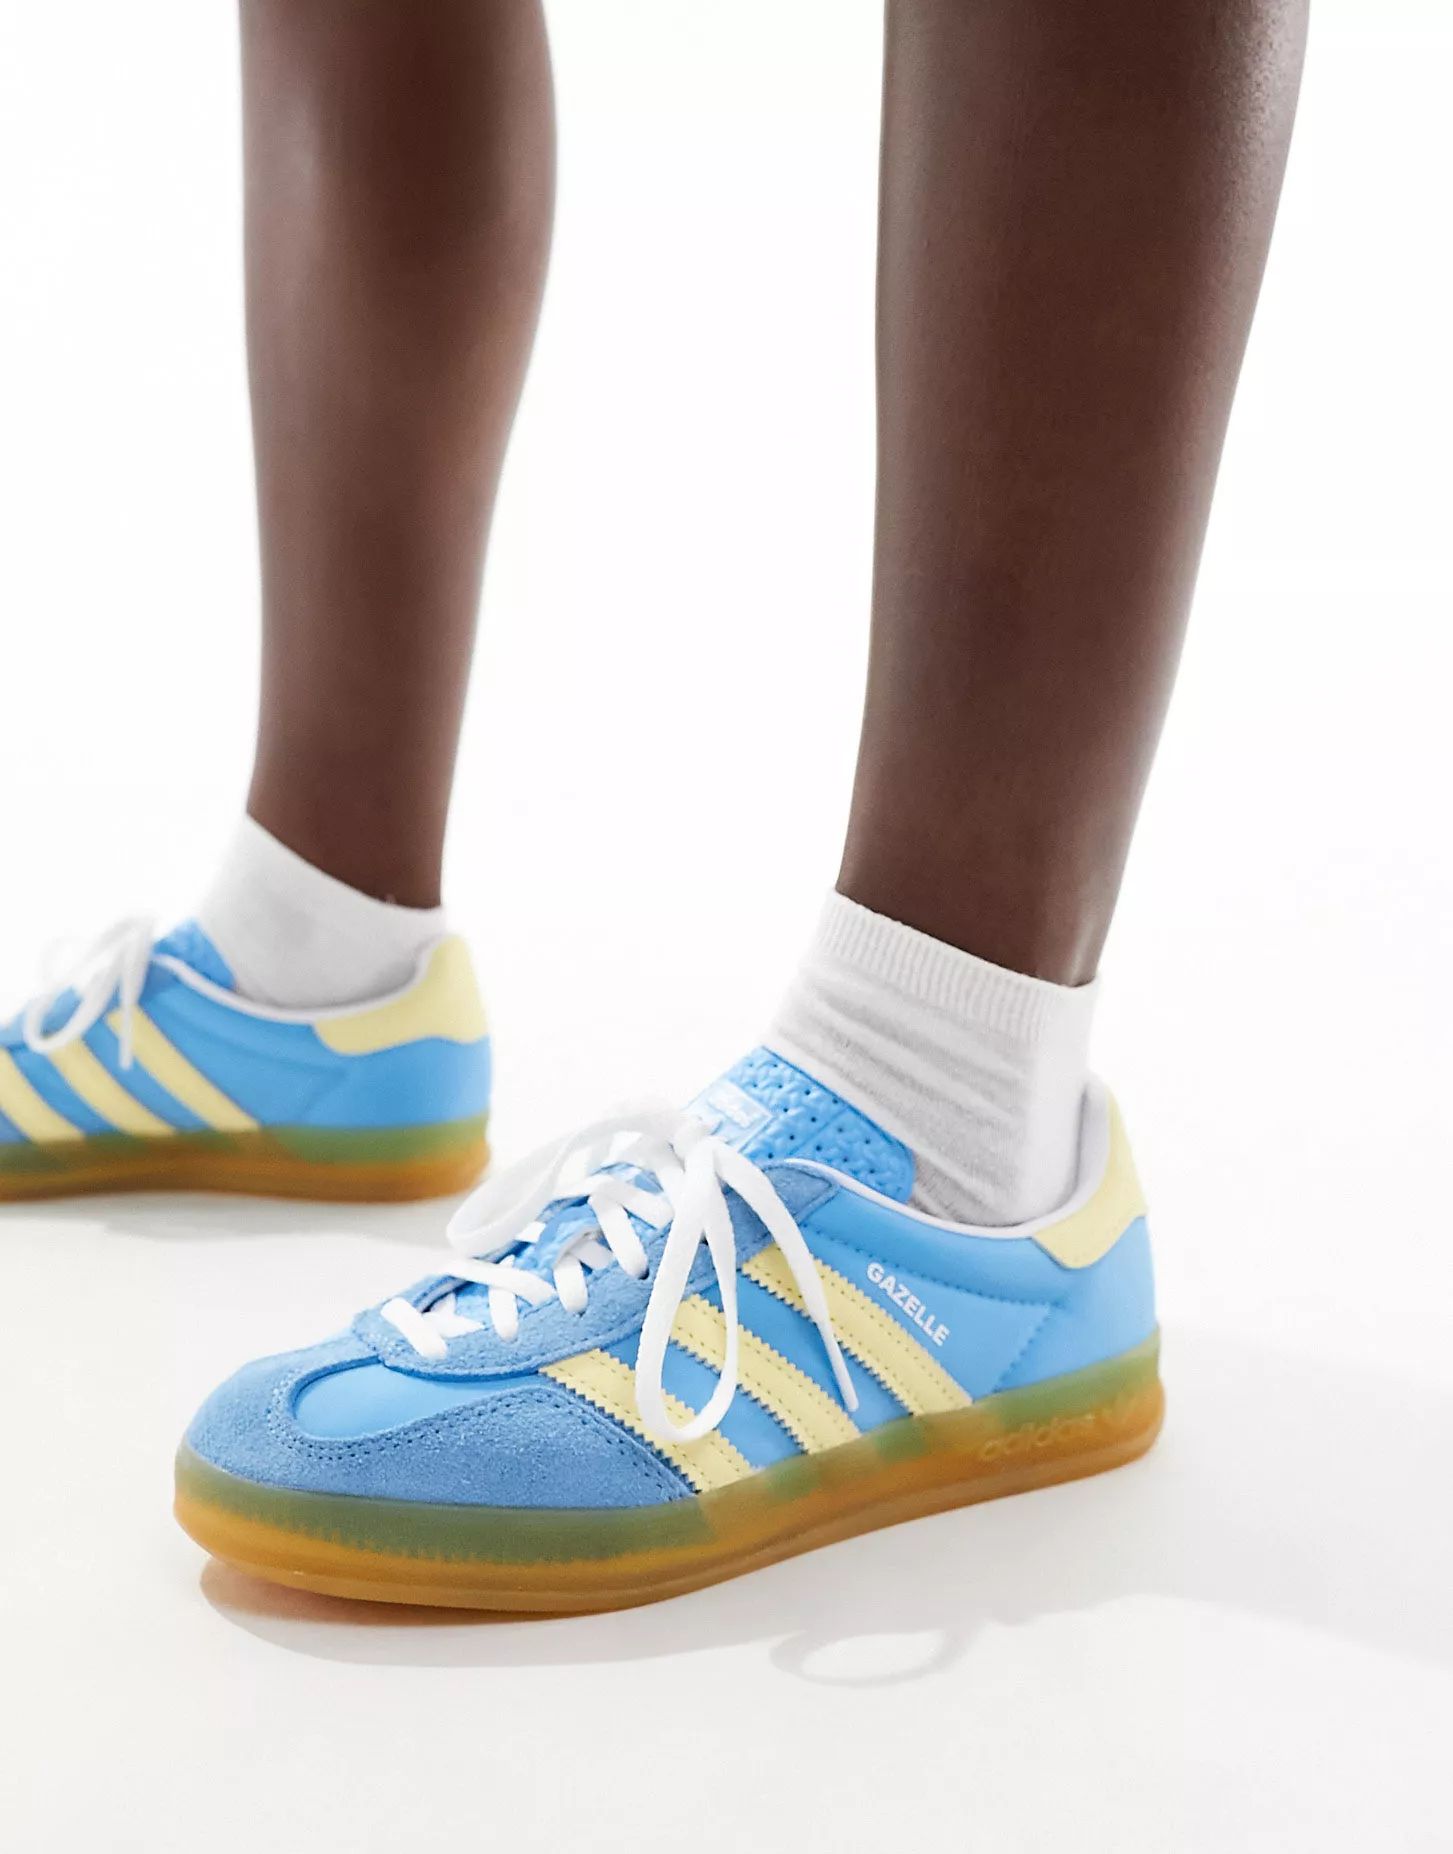 adidas Originals gum sole Gazelle Indoor trainers in blue and yellow | ASOS (Global)